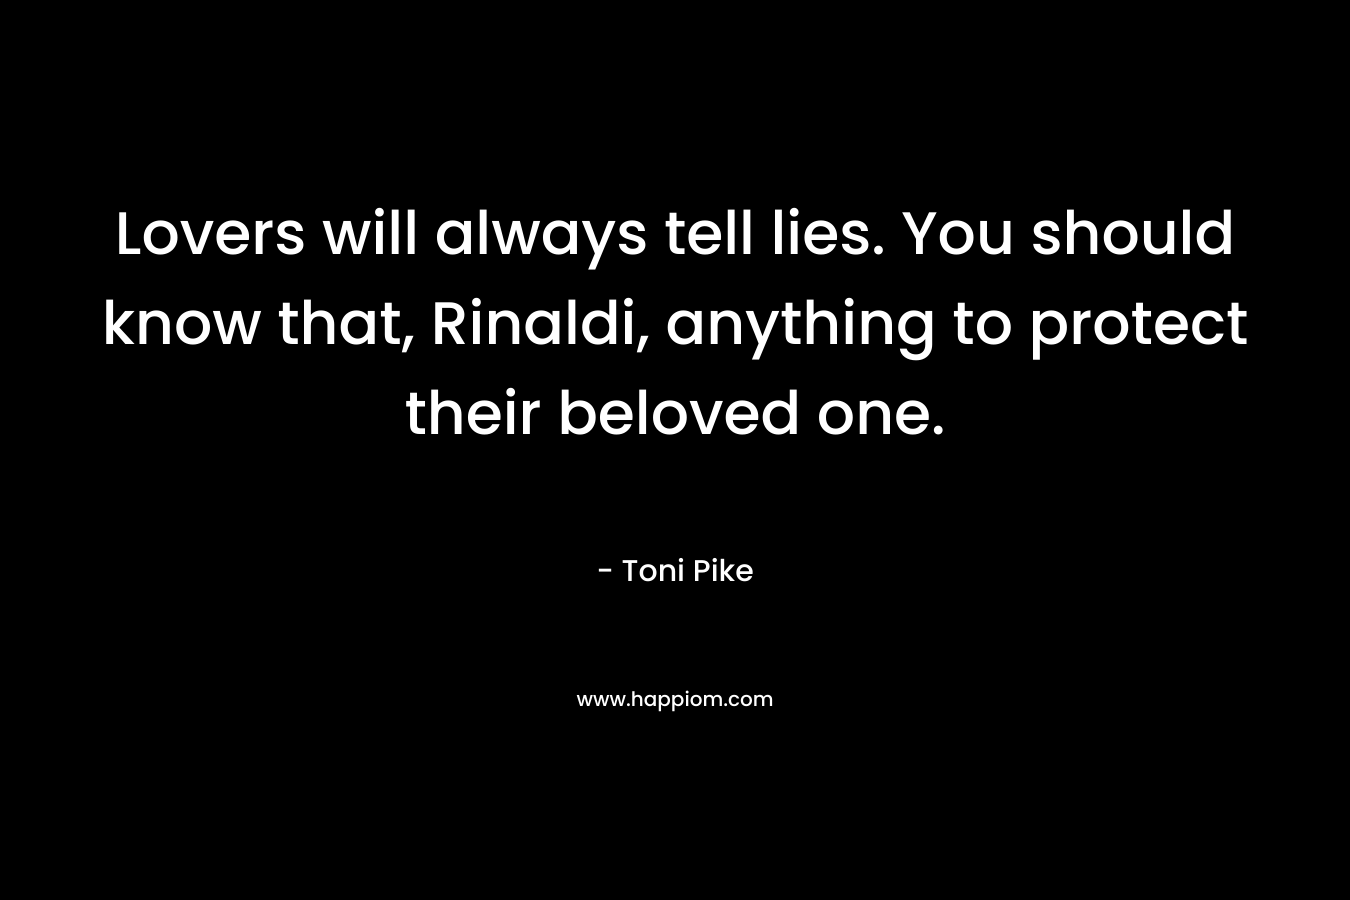 Lovers will always tell lies. You should know that, Rinaldi, anything to protect their beloved one. – Toni Pike